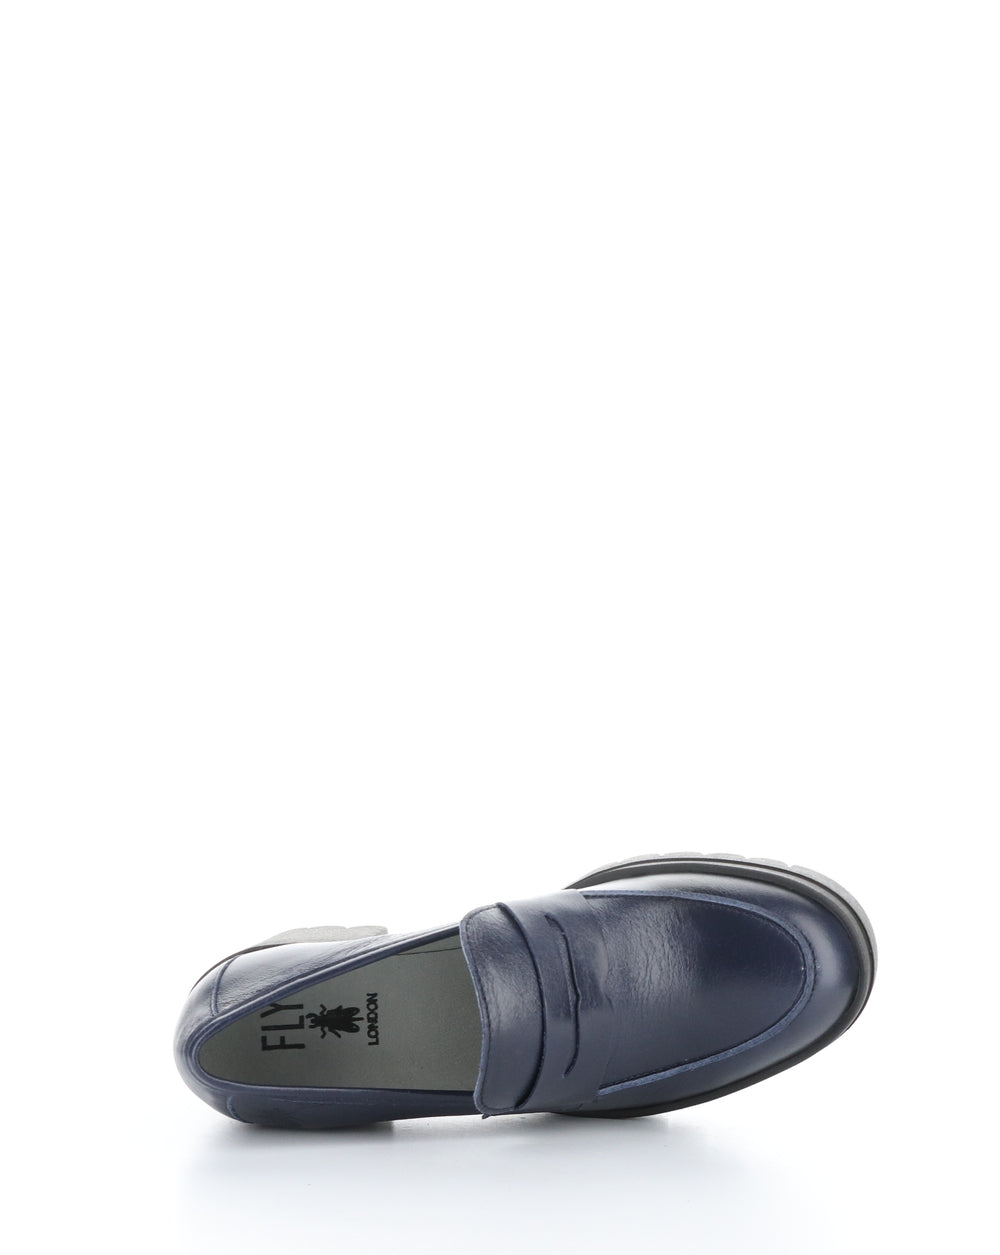 TOKY803FLY 008 NAVY Slip-on Shoes